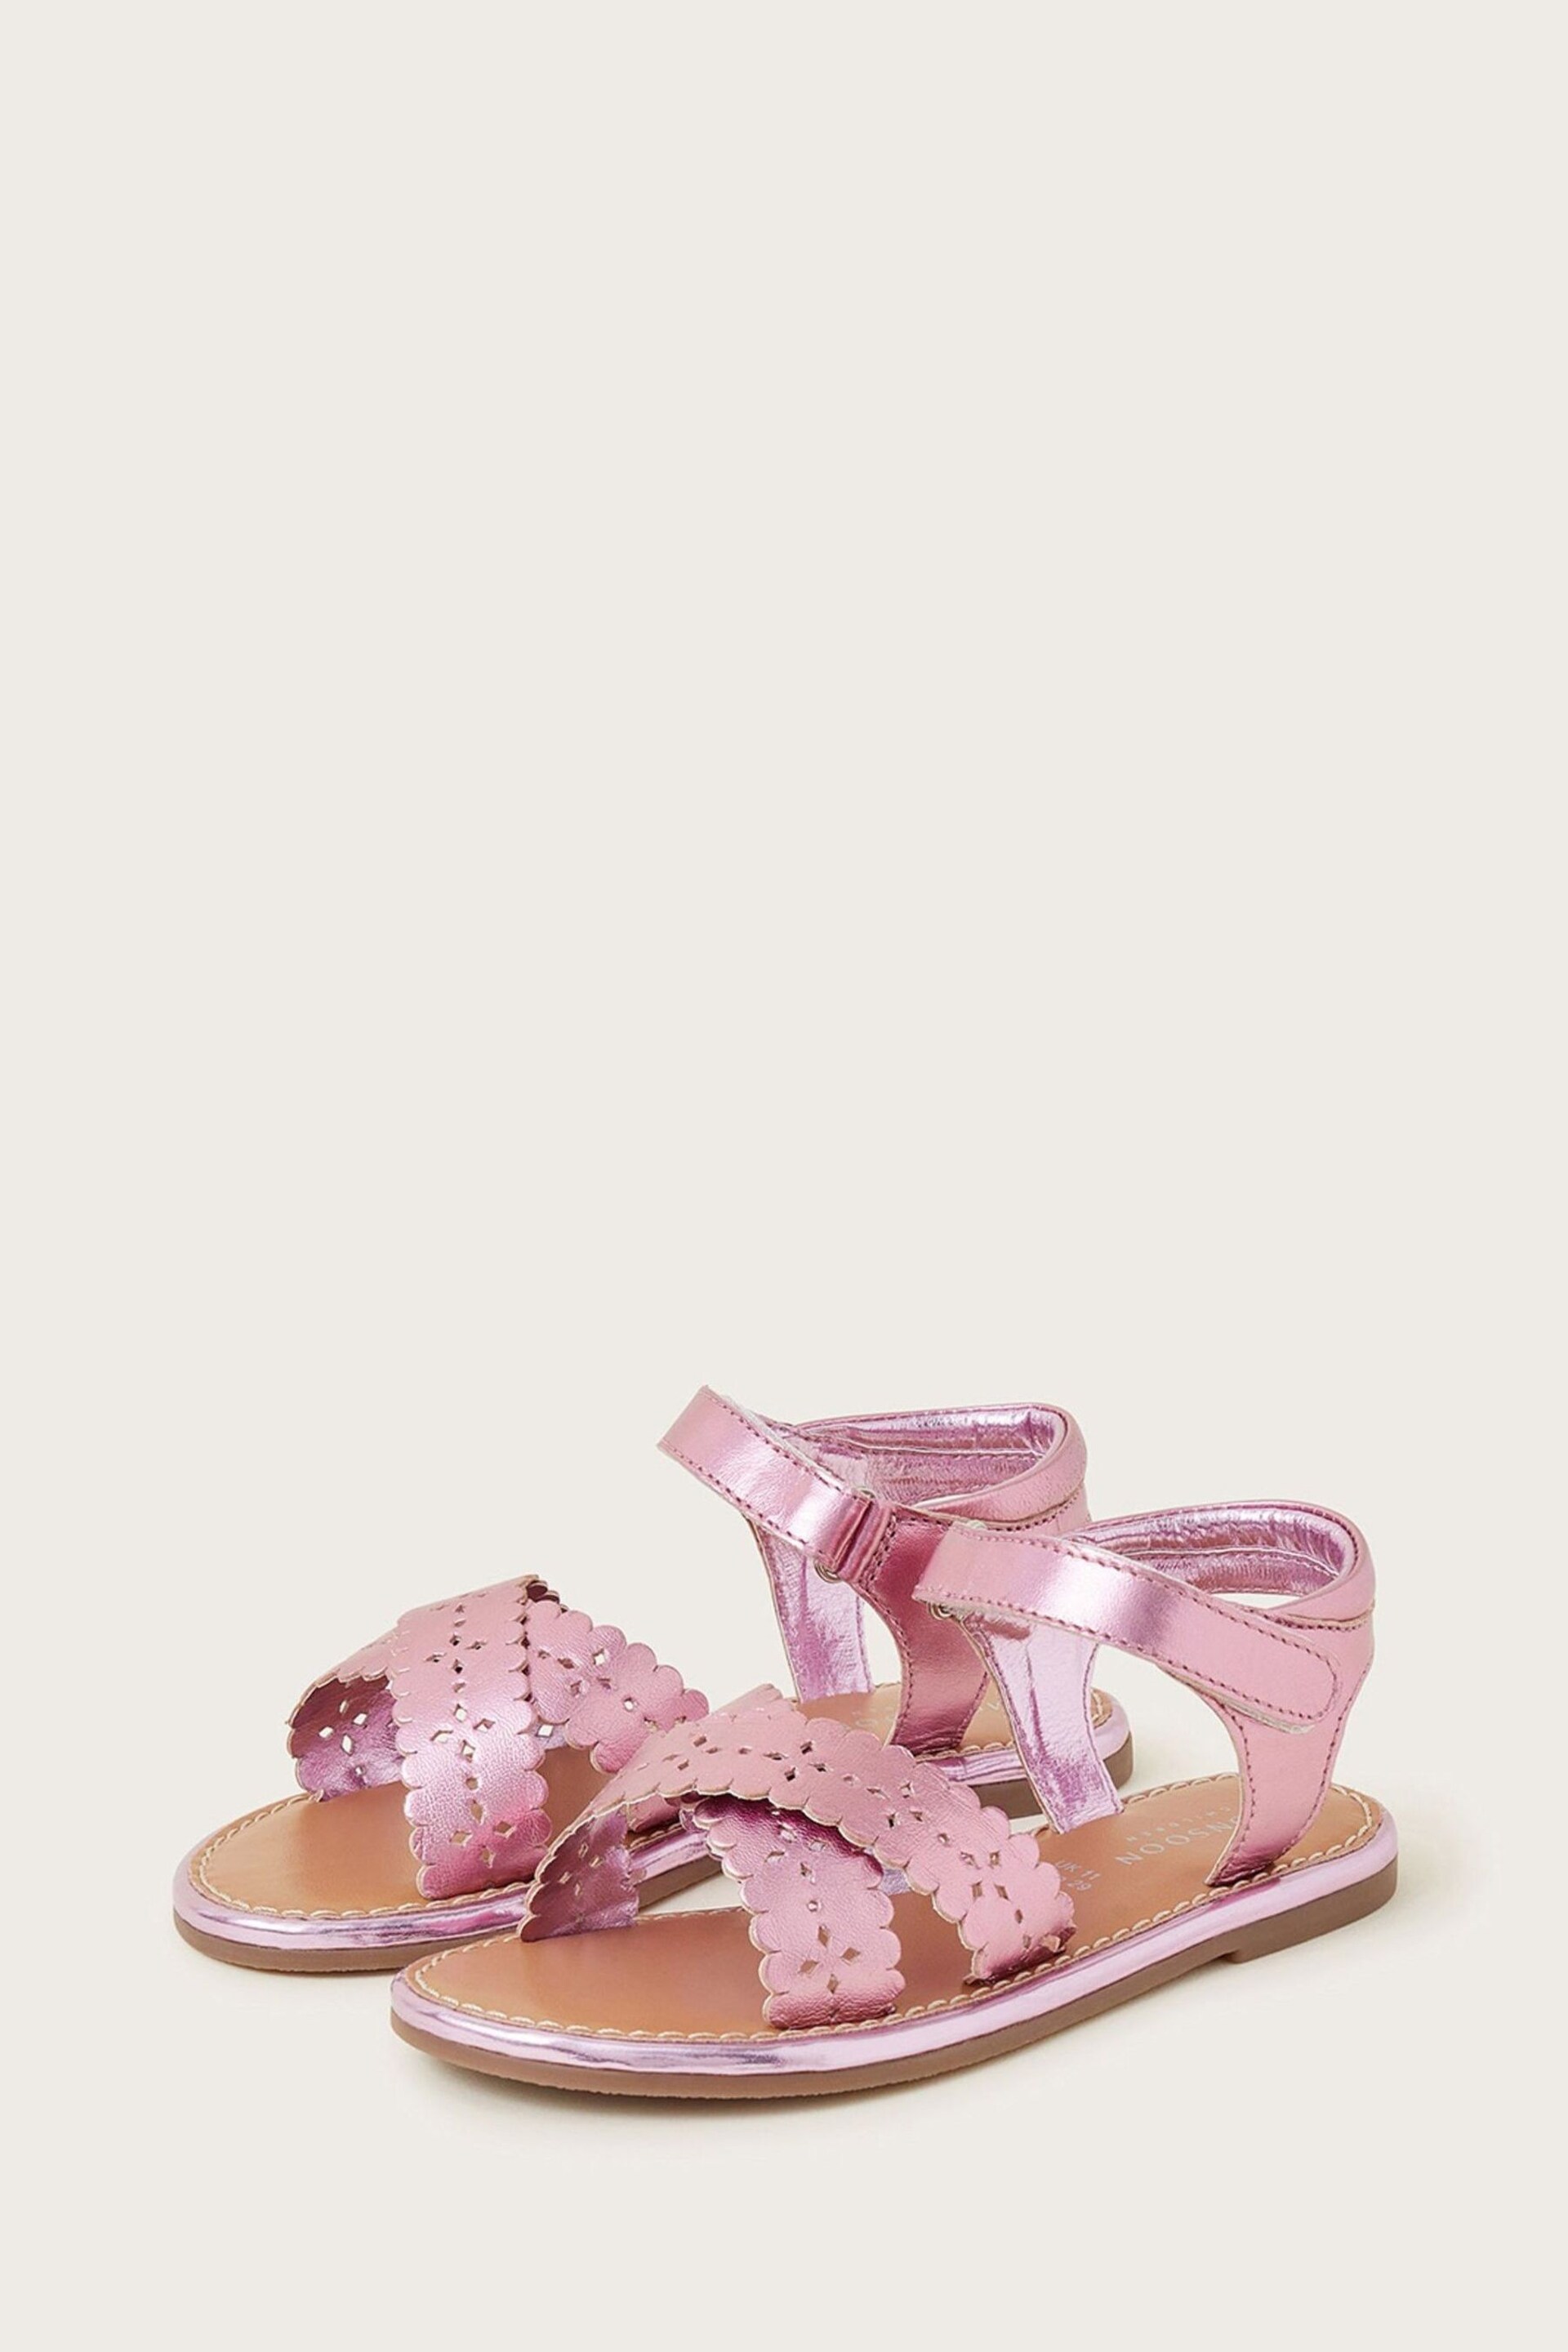 Monsoon Pink Leather Cutwork Sandals - Image 1 of 3